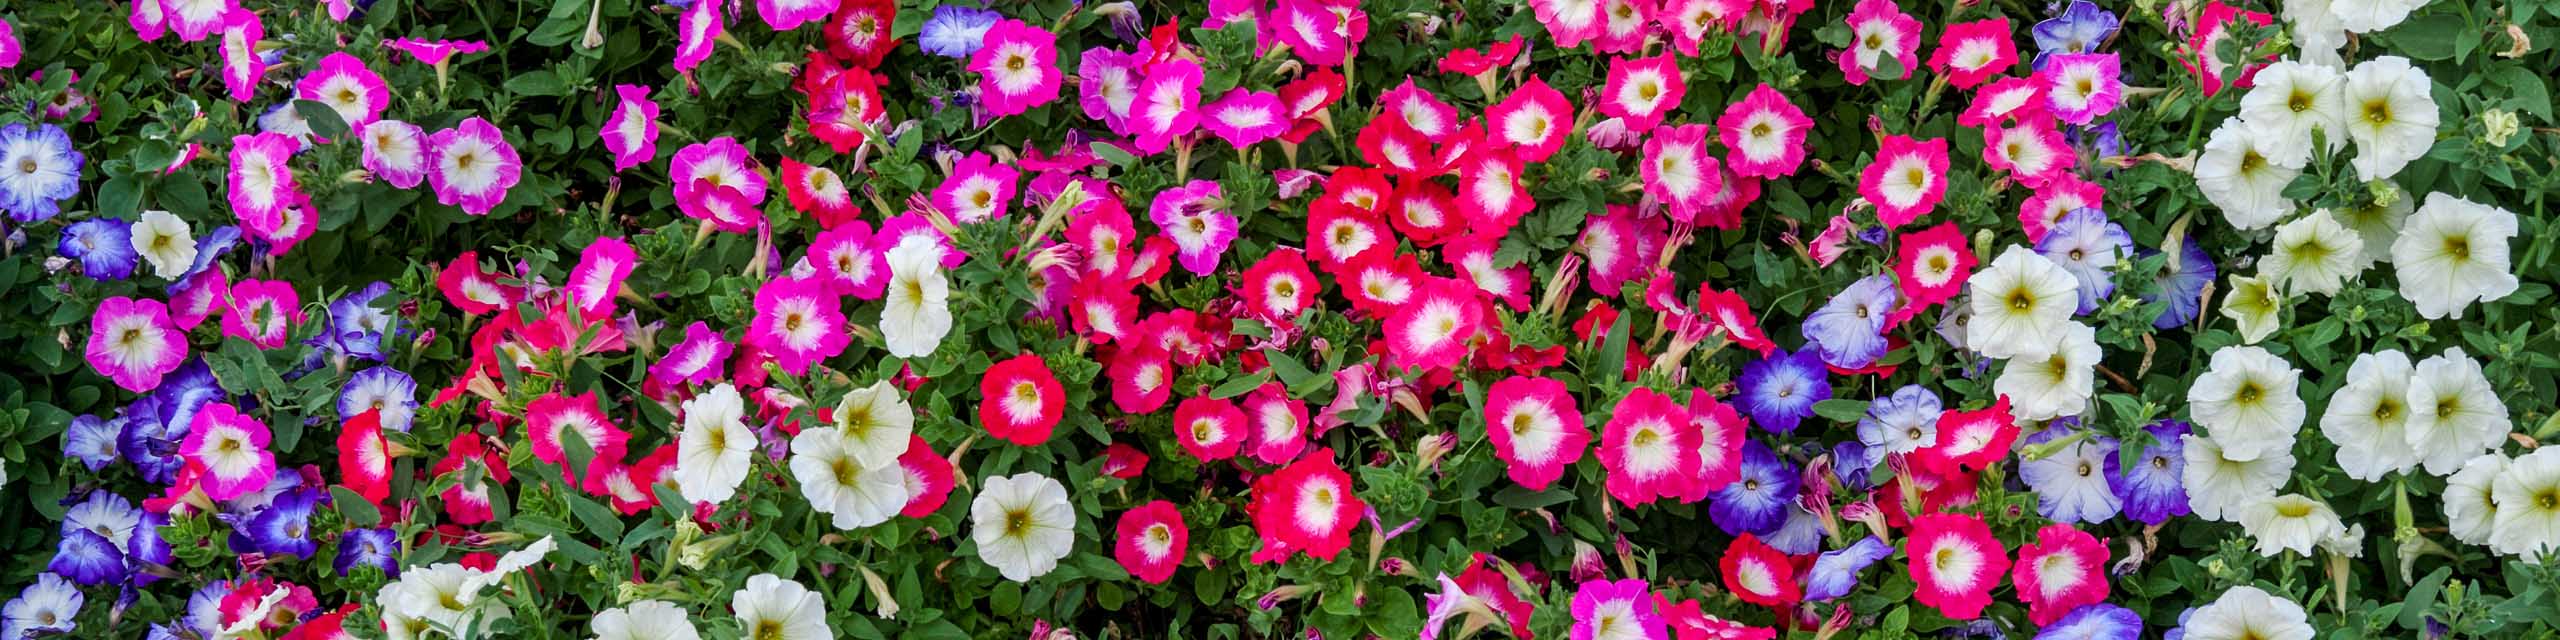 Top down image of different colors of petunia flowers.